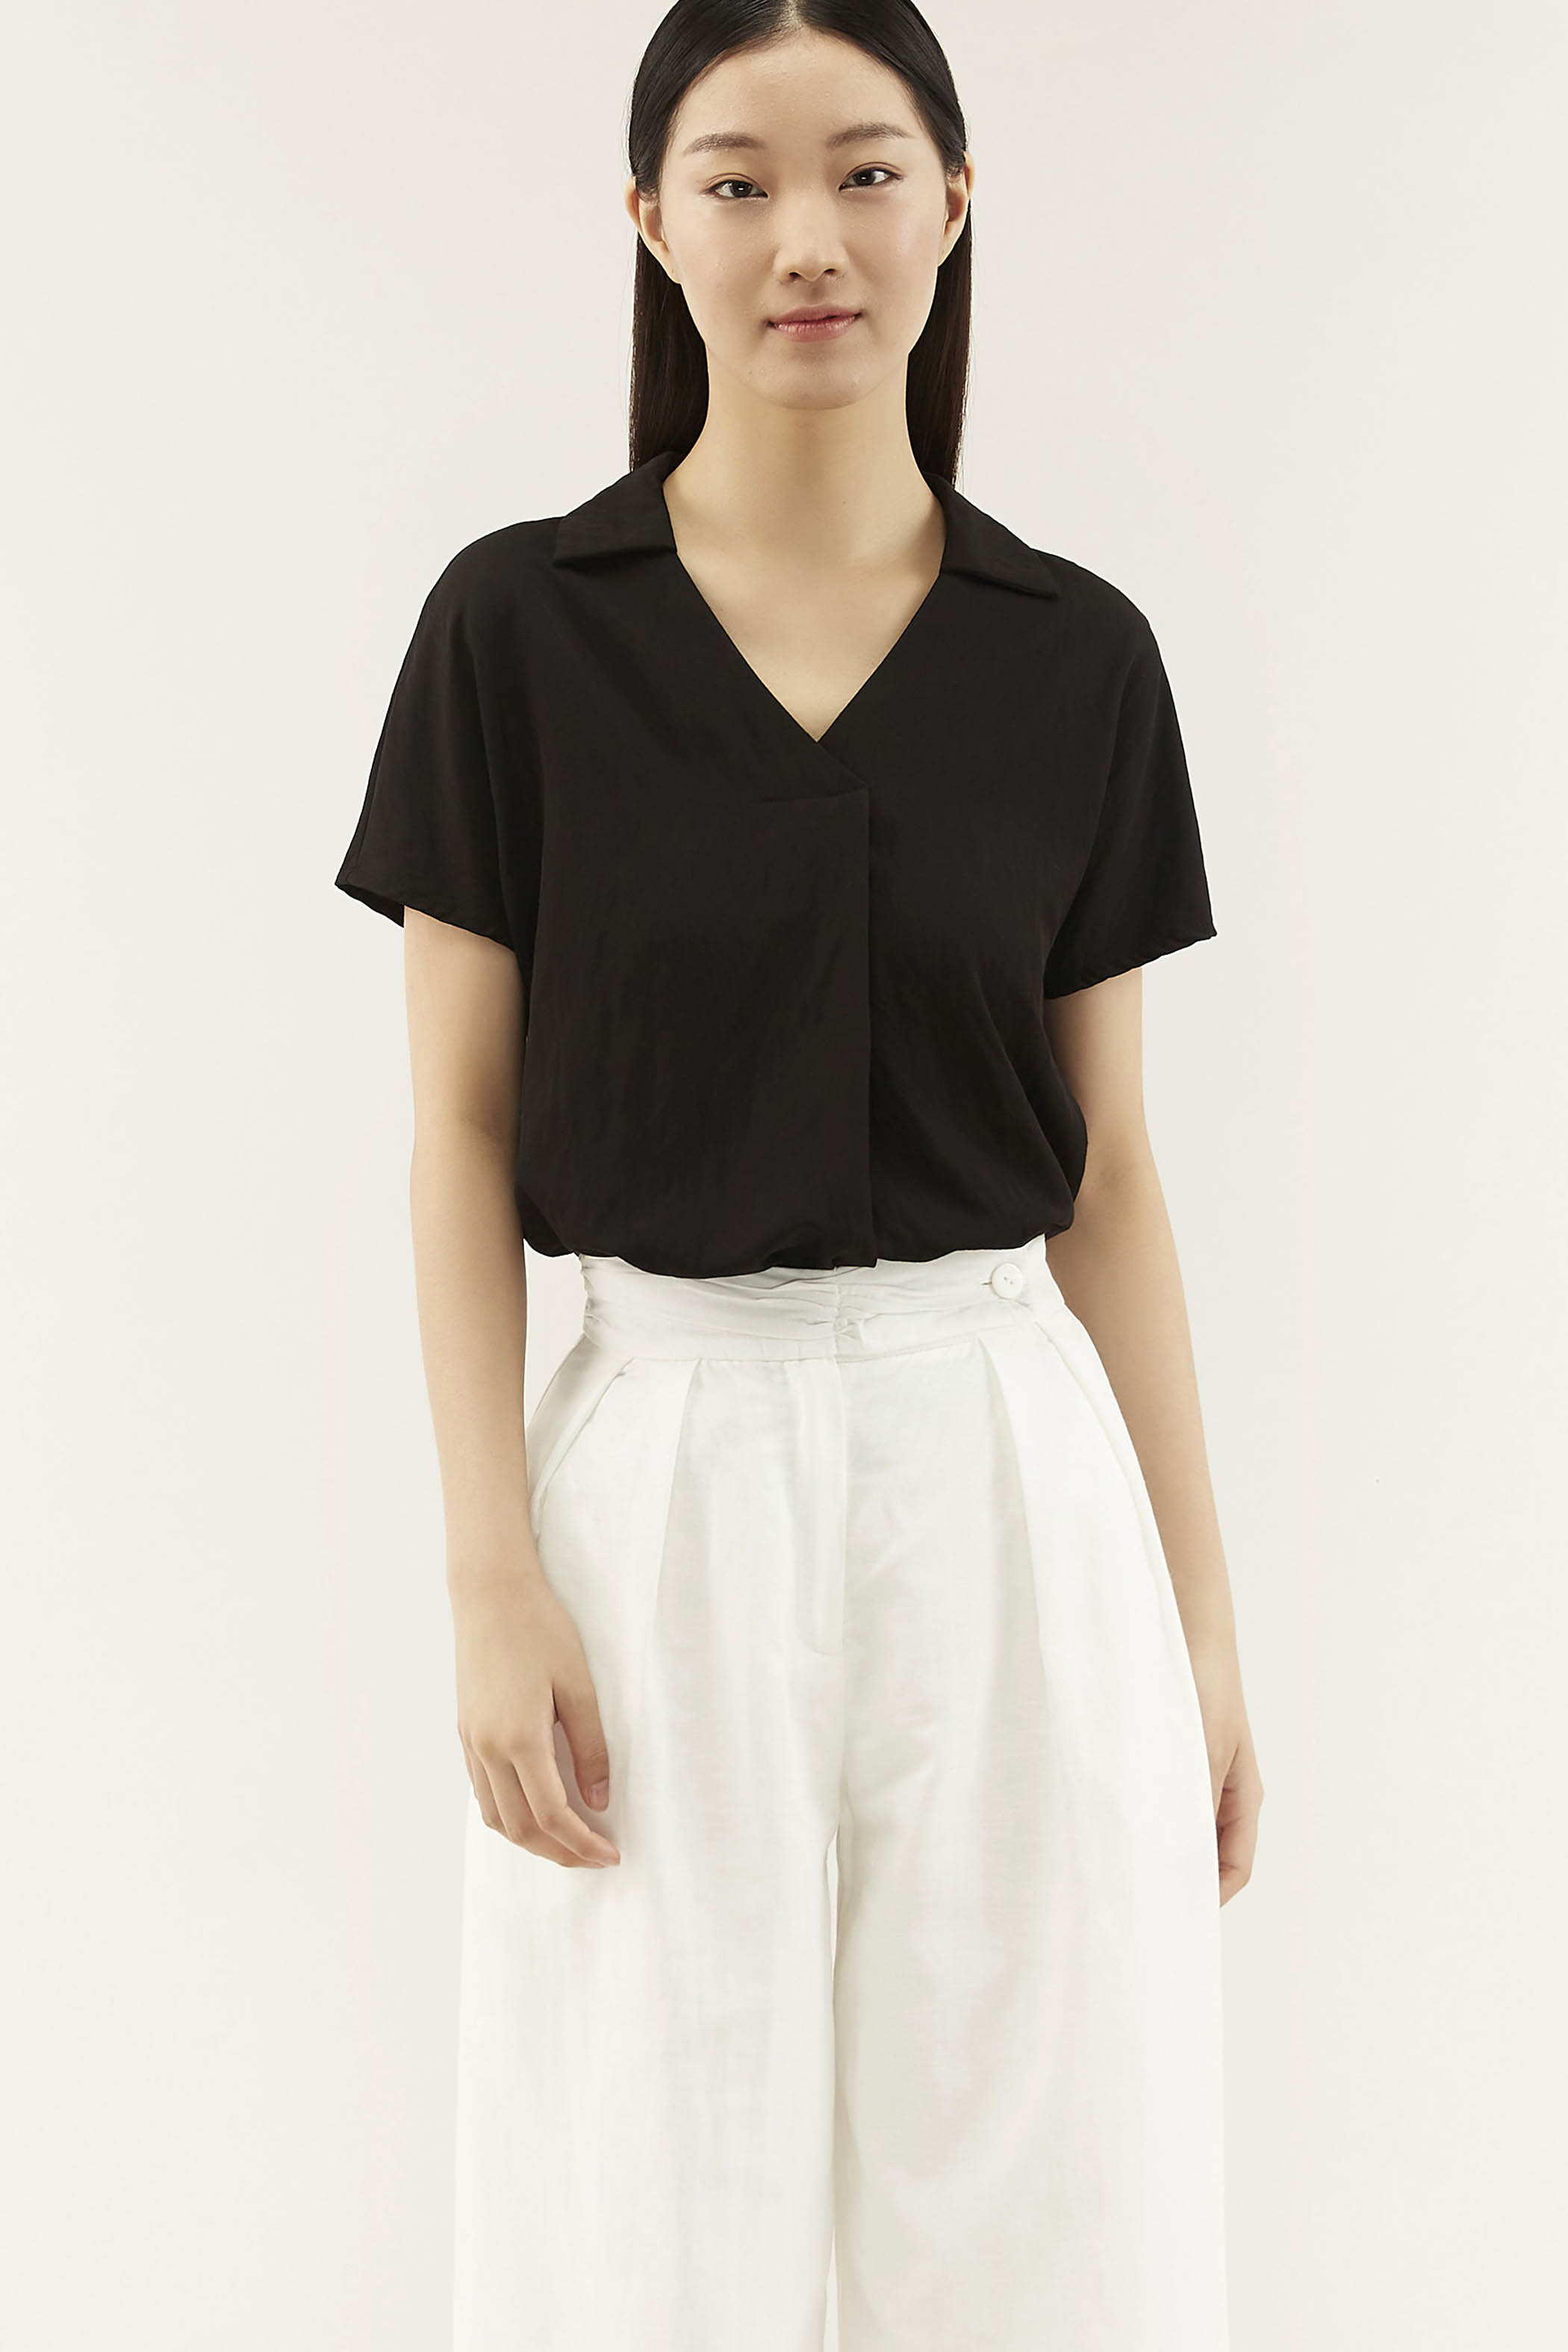 Verenice Collared Blouse 